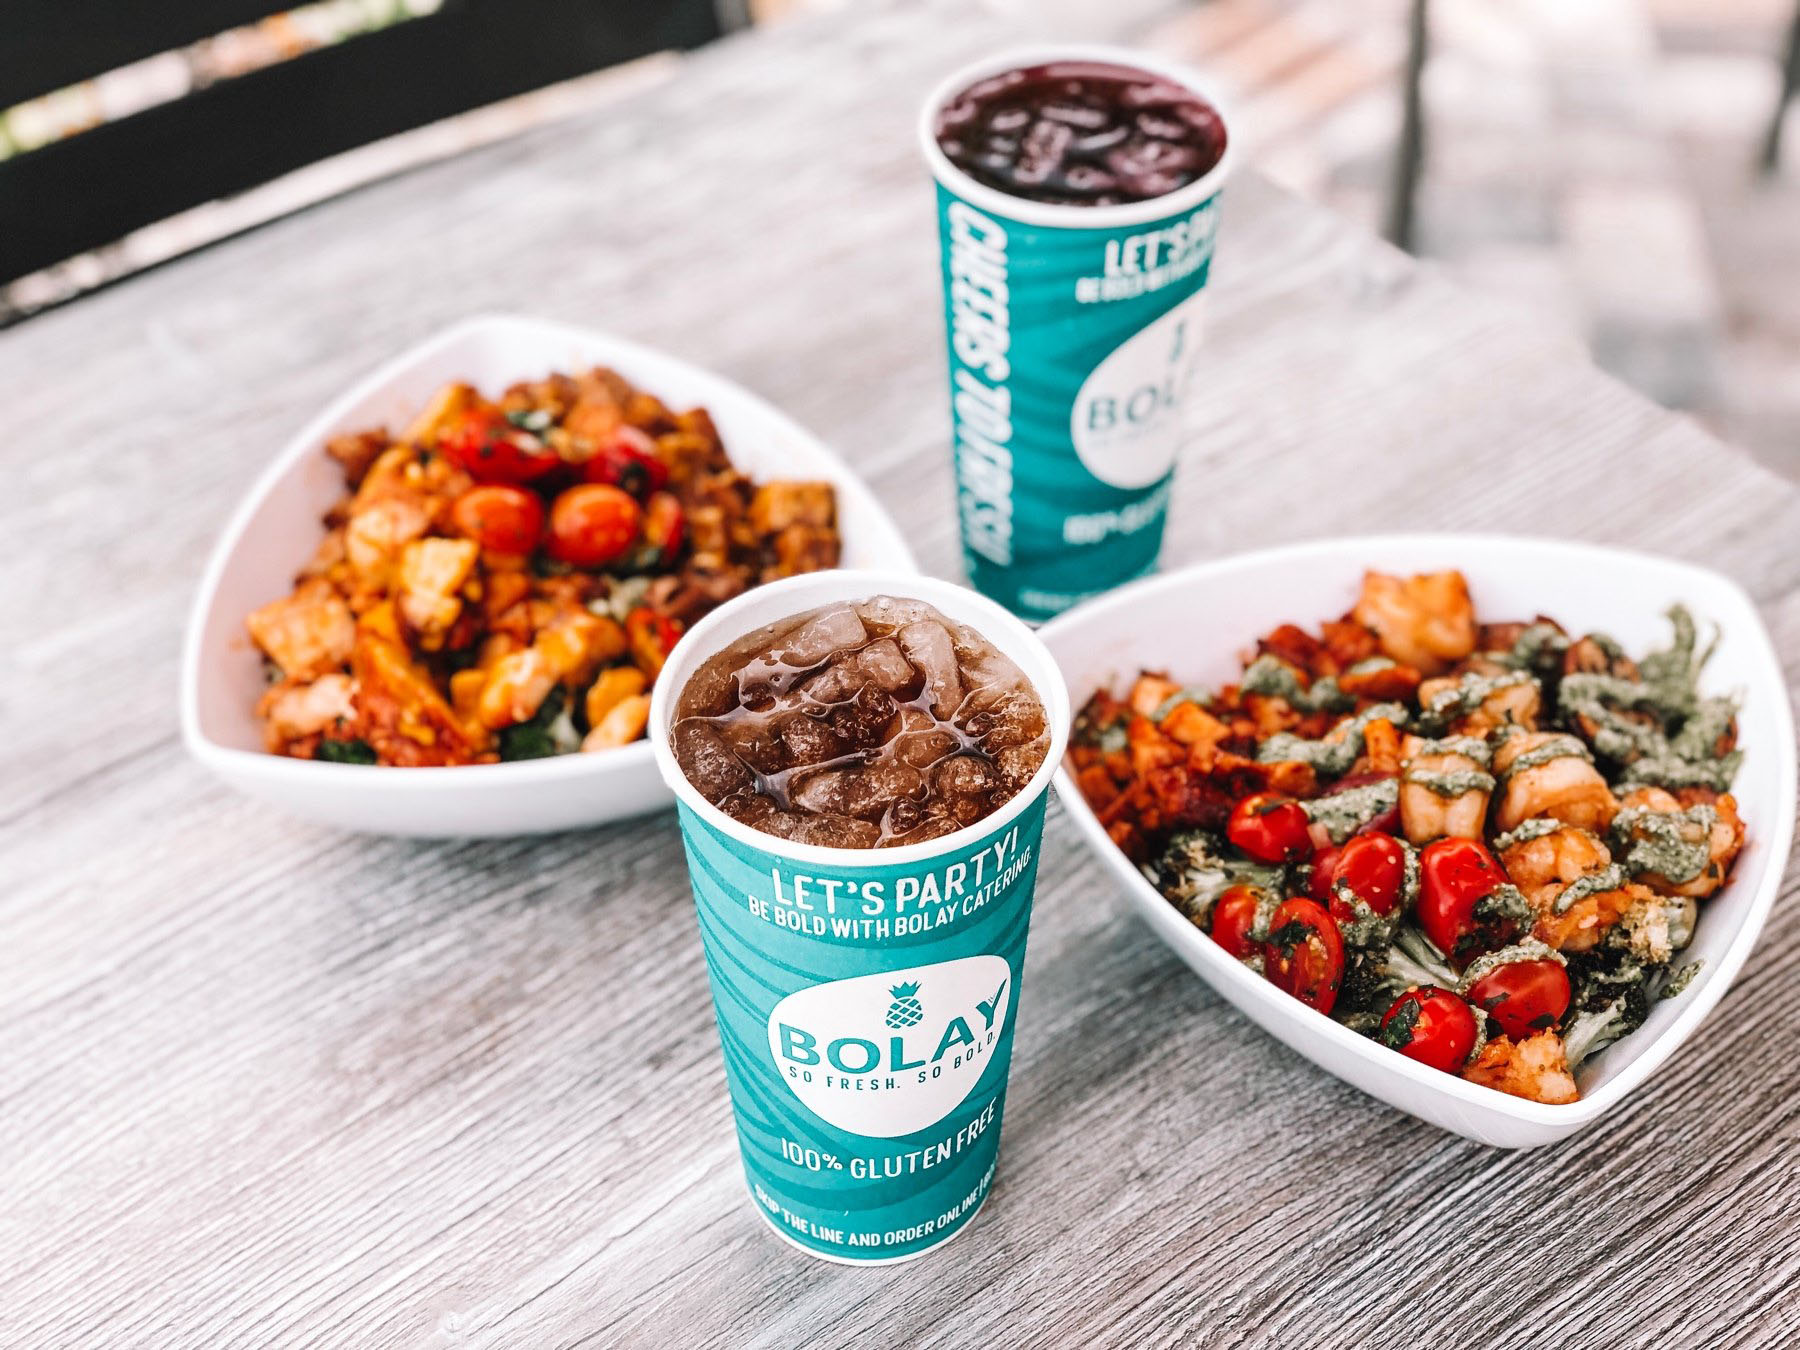 Bolay Opening Fast-Casual Healthy Restaurant in Coral Springs